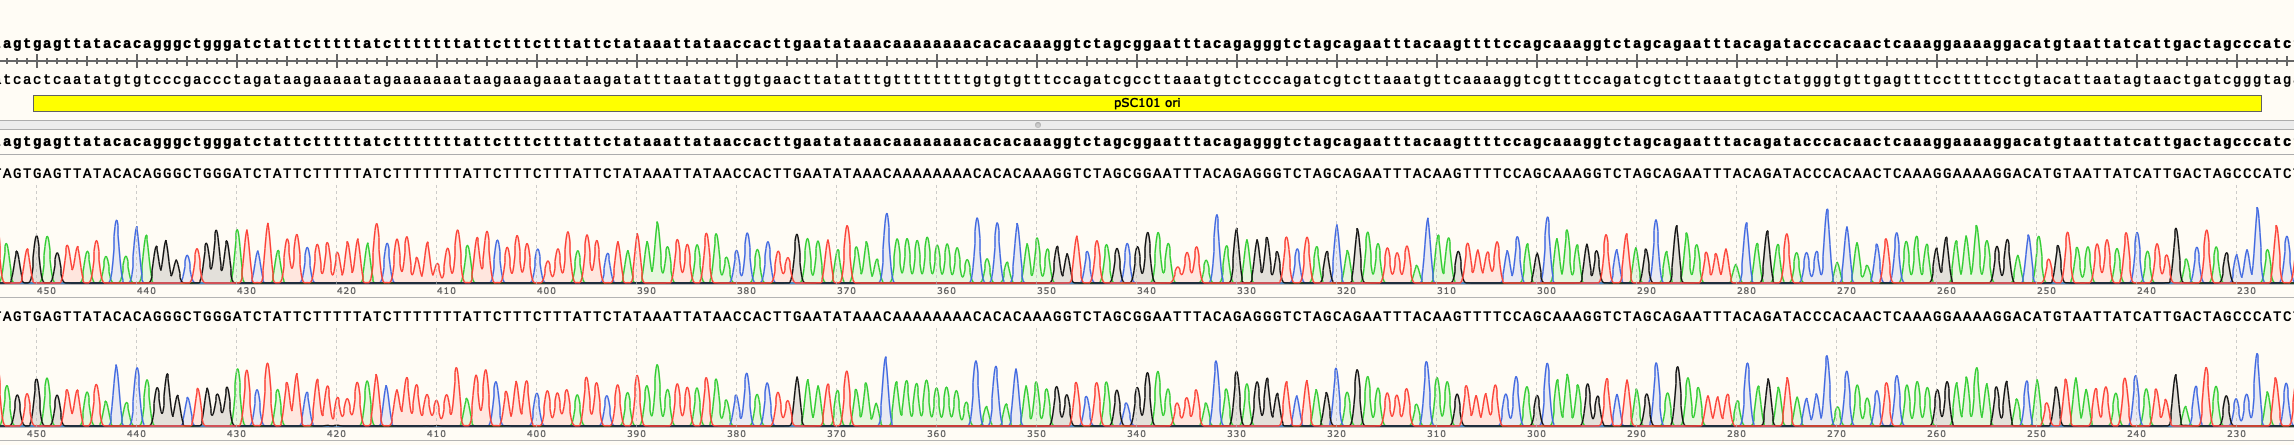 Representative sequencing of the origin of replication pSC101 of pSB4K02 and pSB4K04.